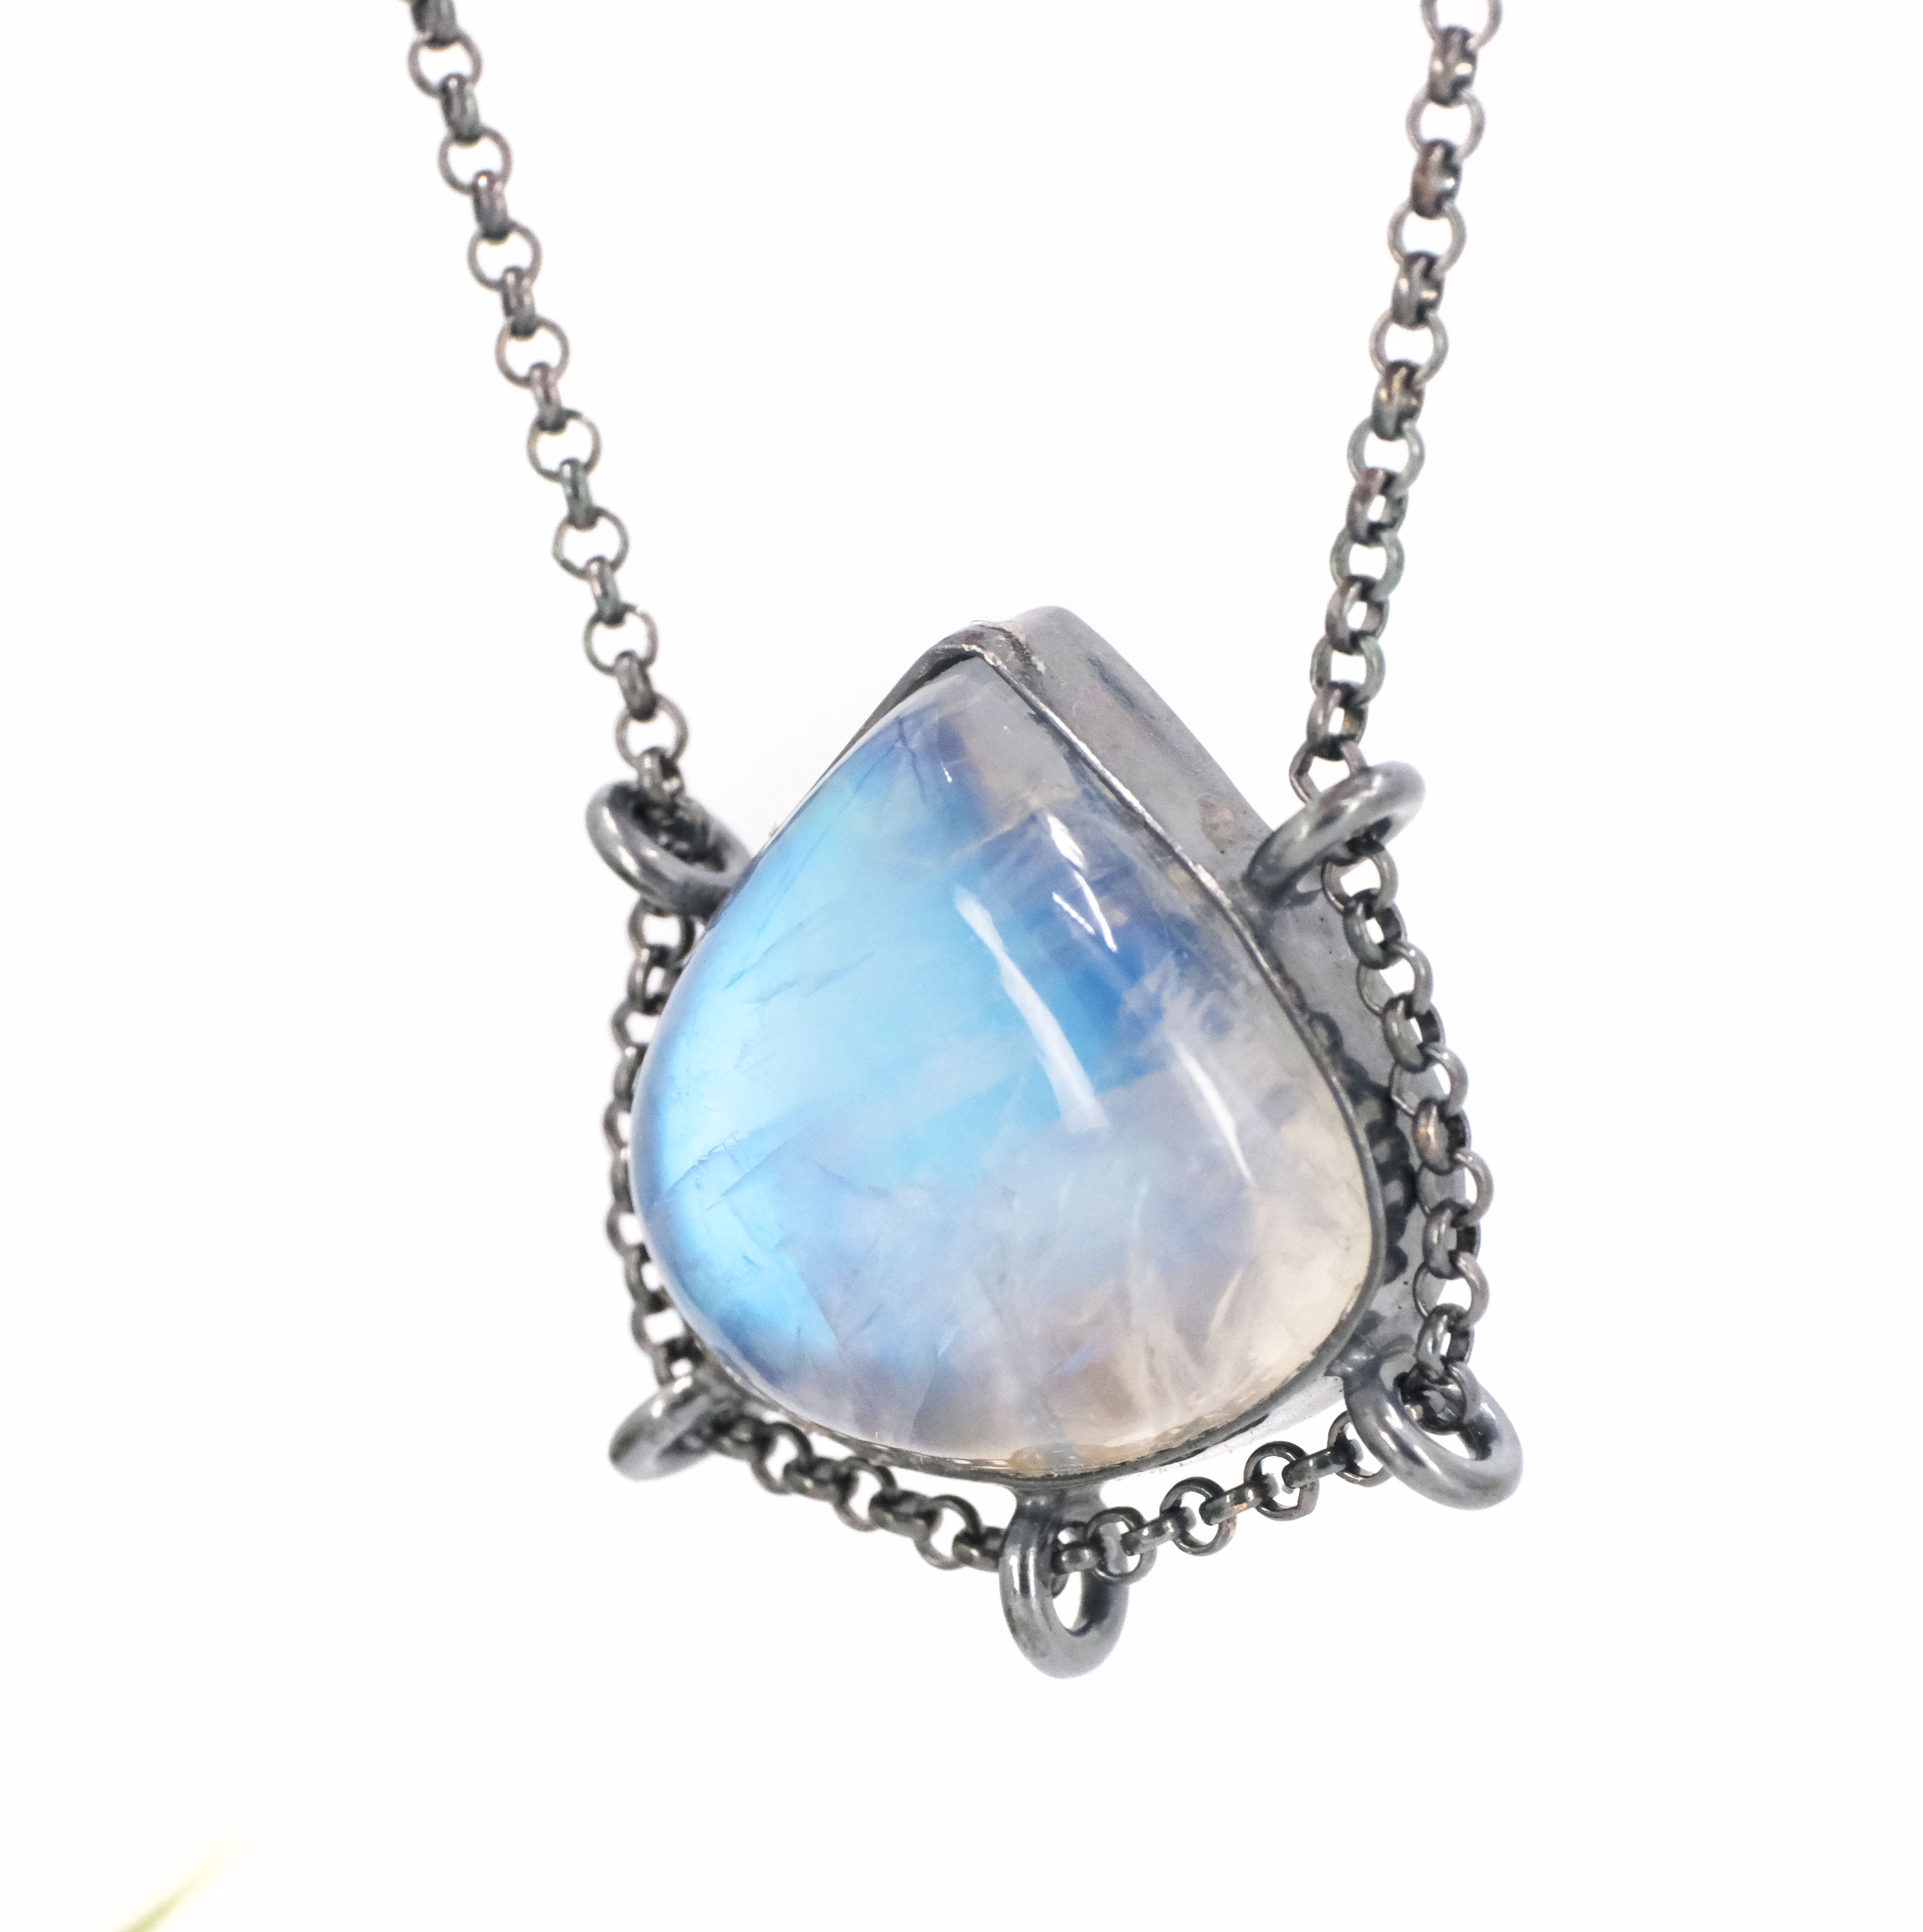 Rainbow Moonstone Path Necklace - One of a Kind